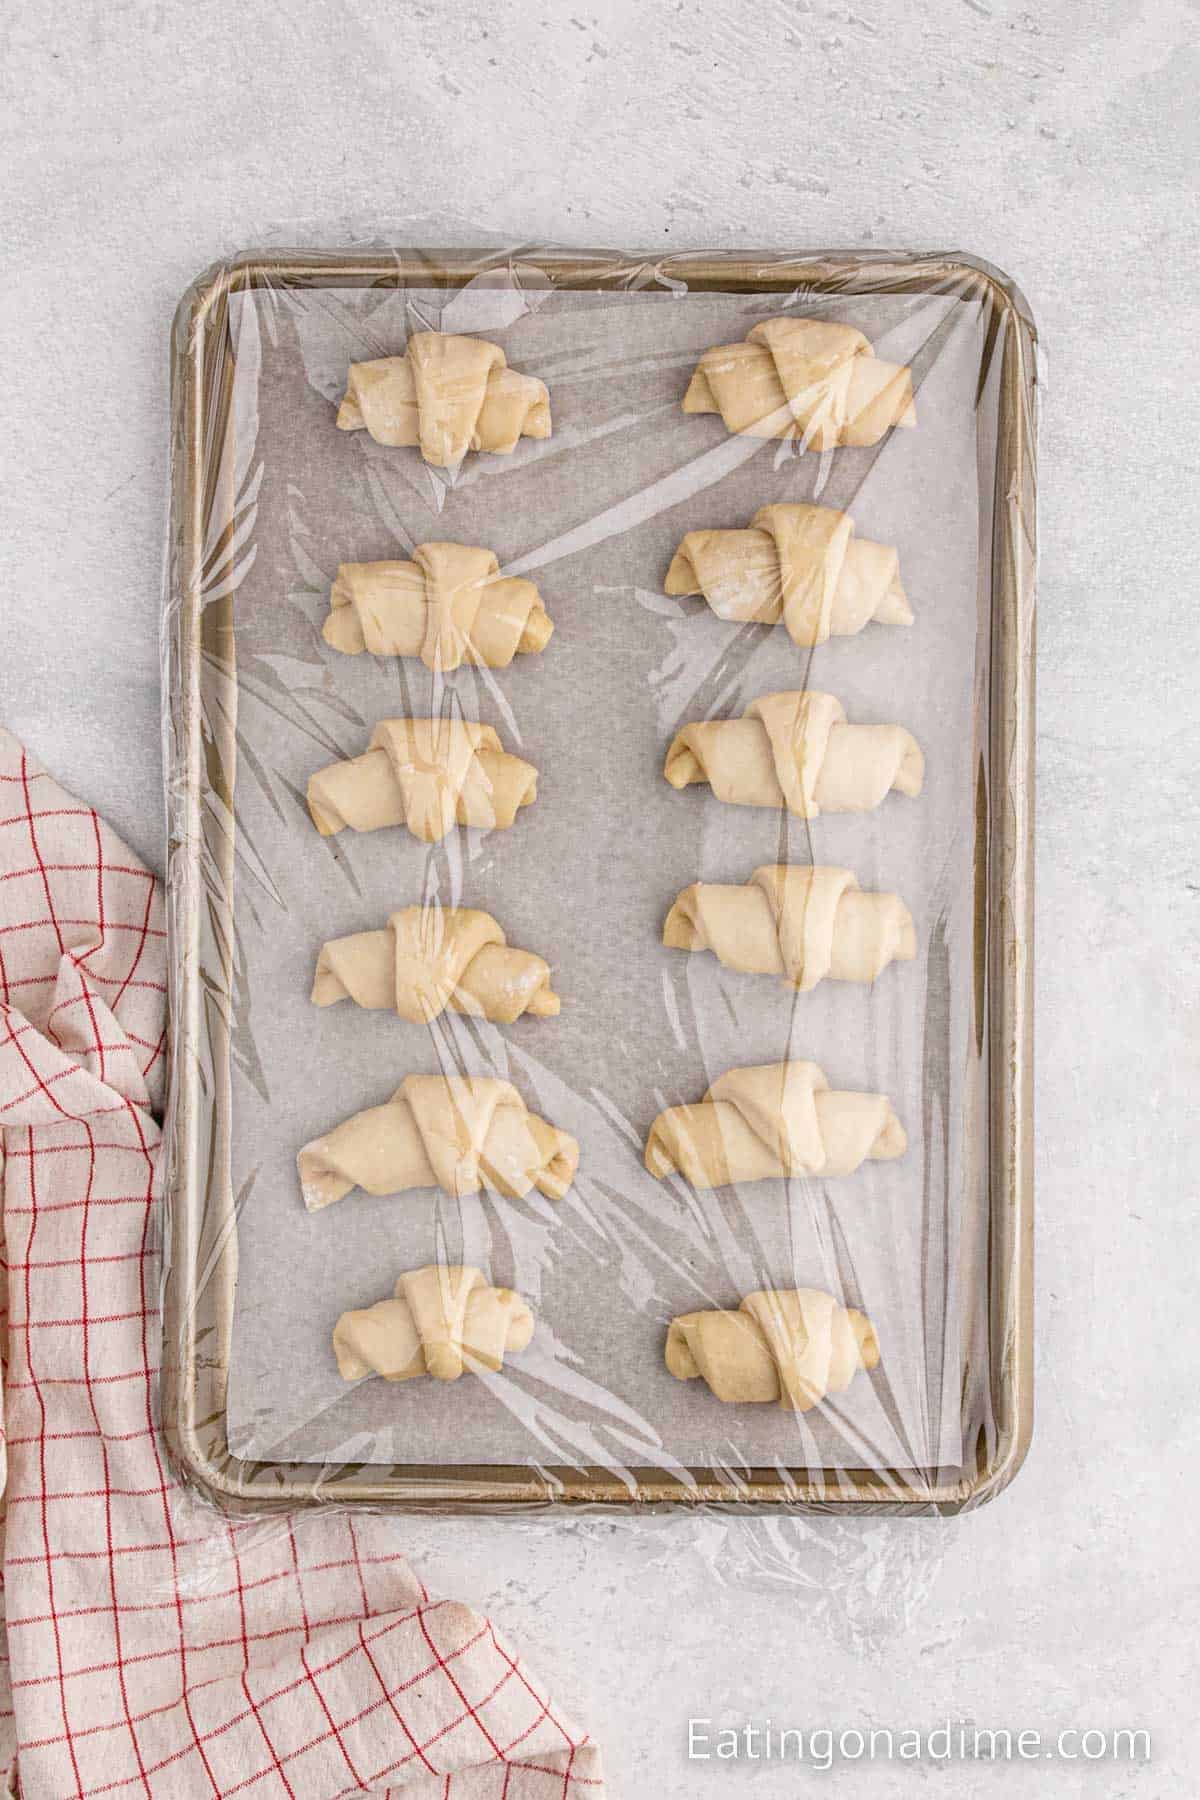 Prepared uncooked crescent rolls on a baking sheet covered with plastic wrap